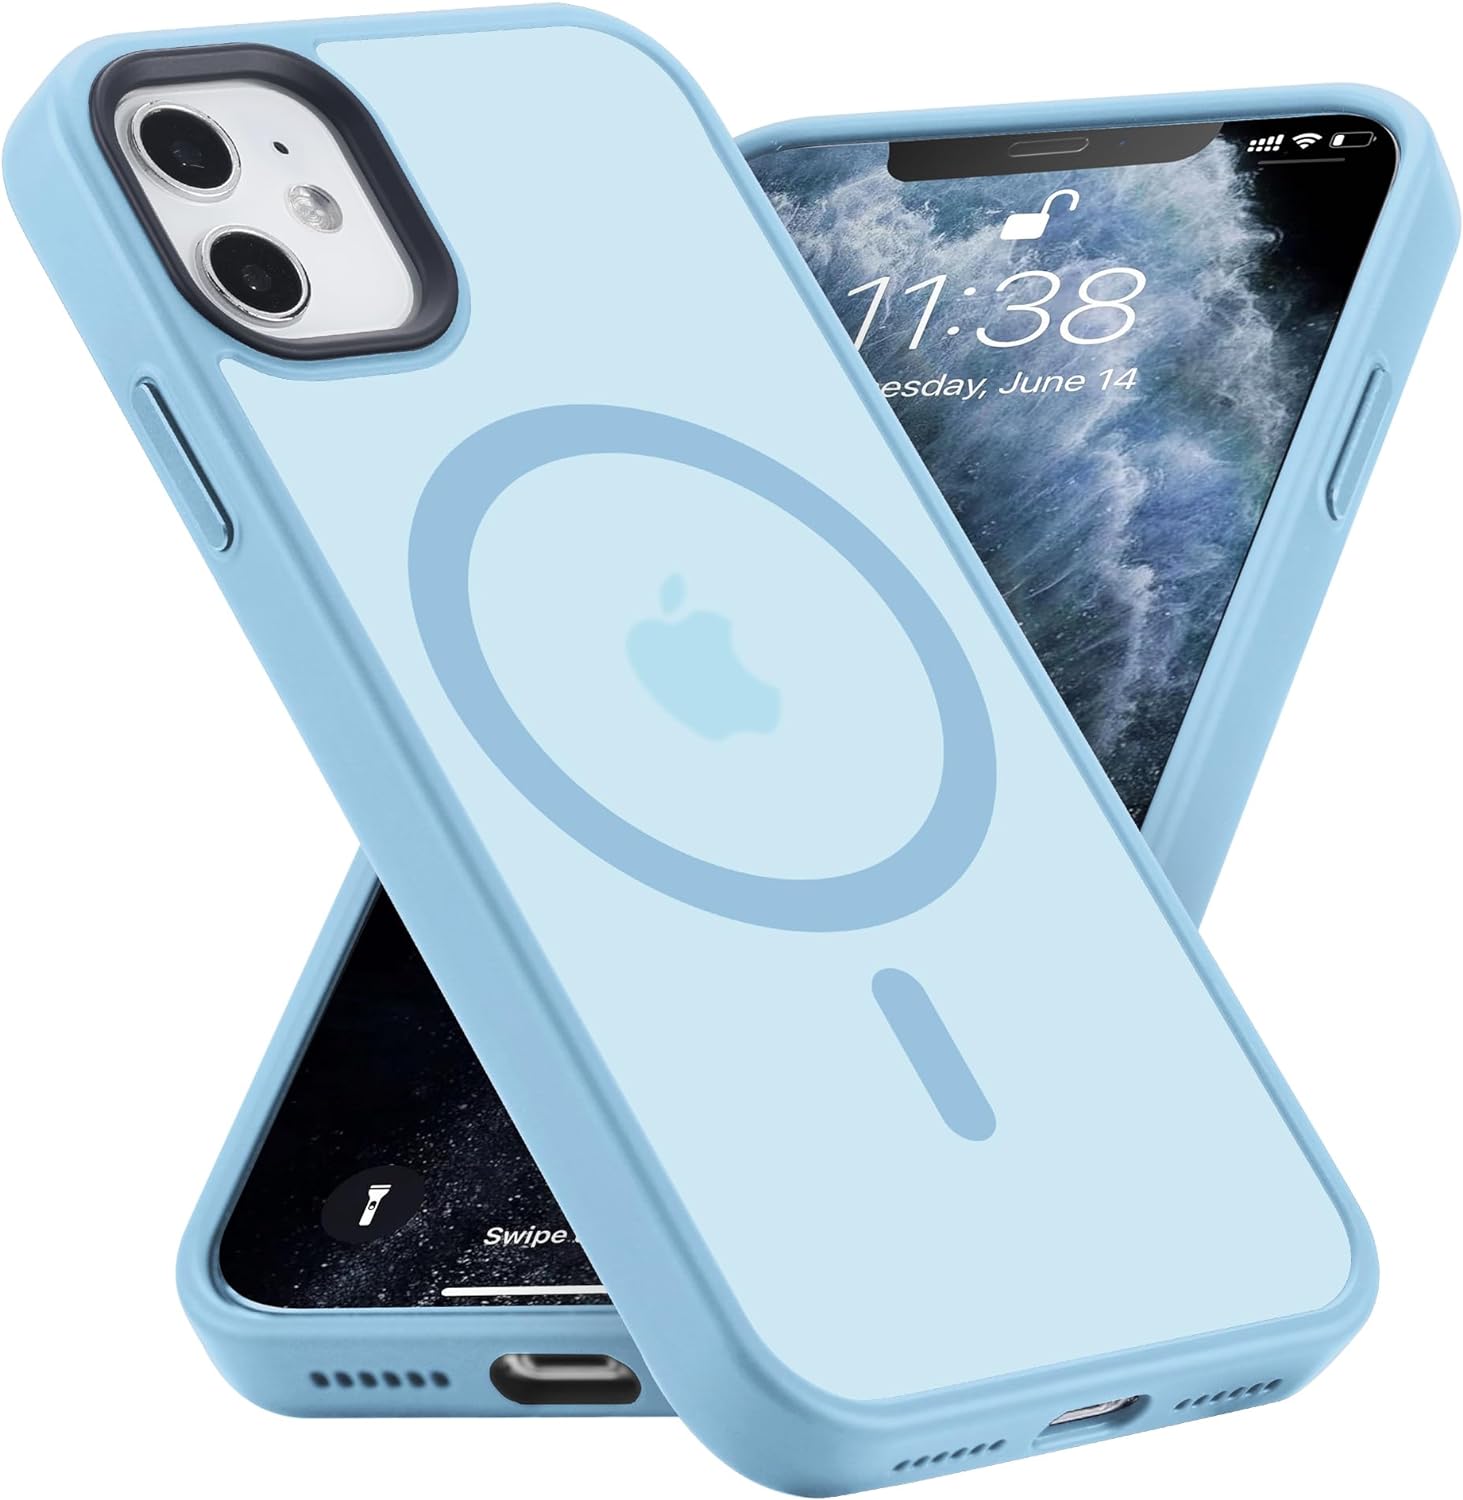 strong magnetic case for iphone 11 compatibilty with magsafe protective shockproof cover phone case for iphone 11 61 sie